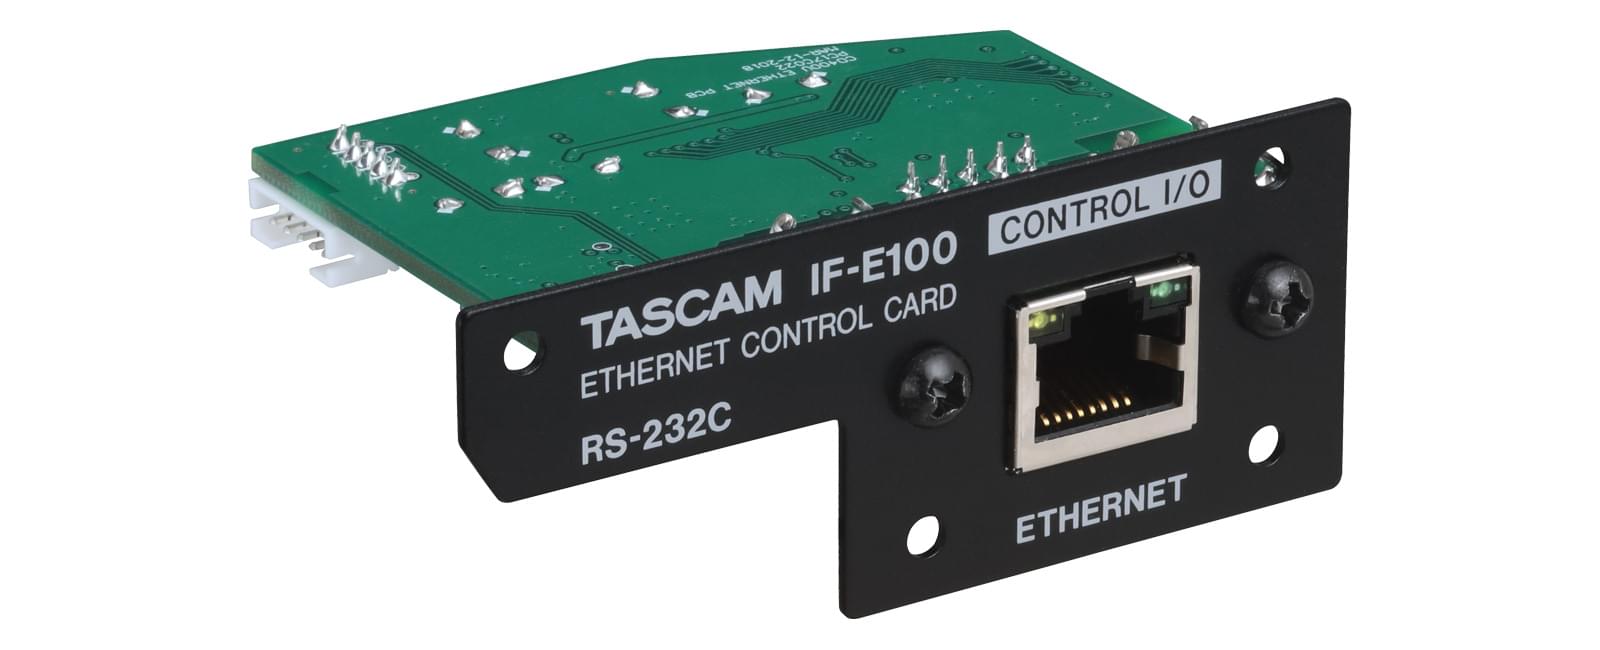 Ethernet Control Card for CD-400UDAB | Tascam IF-E100